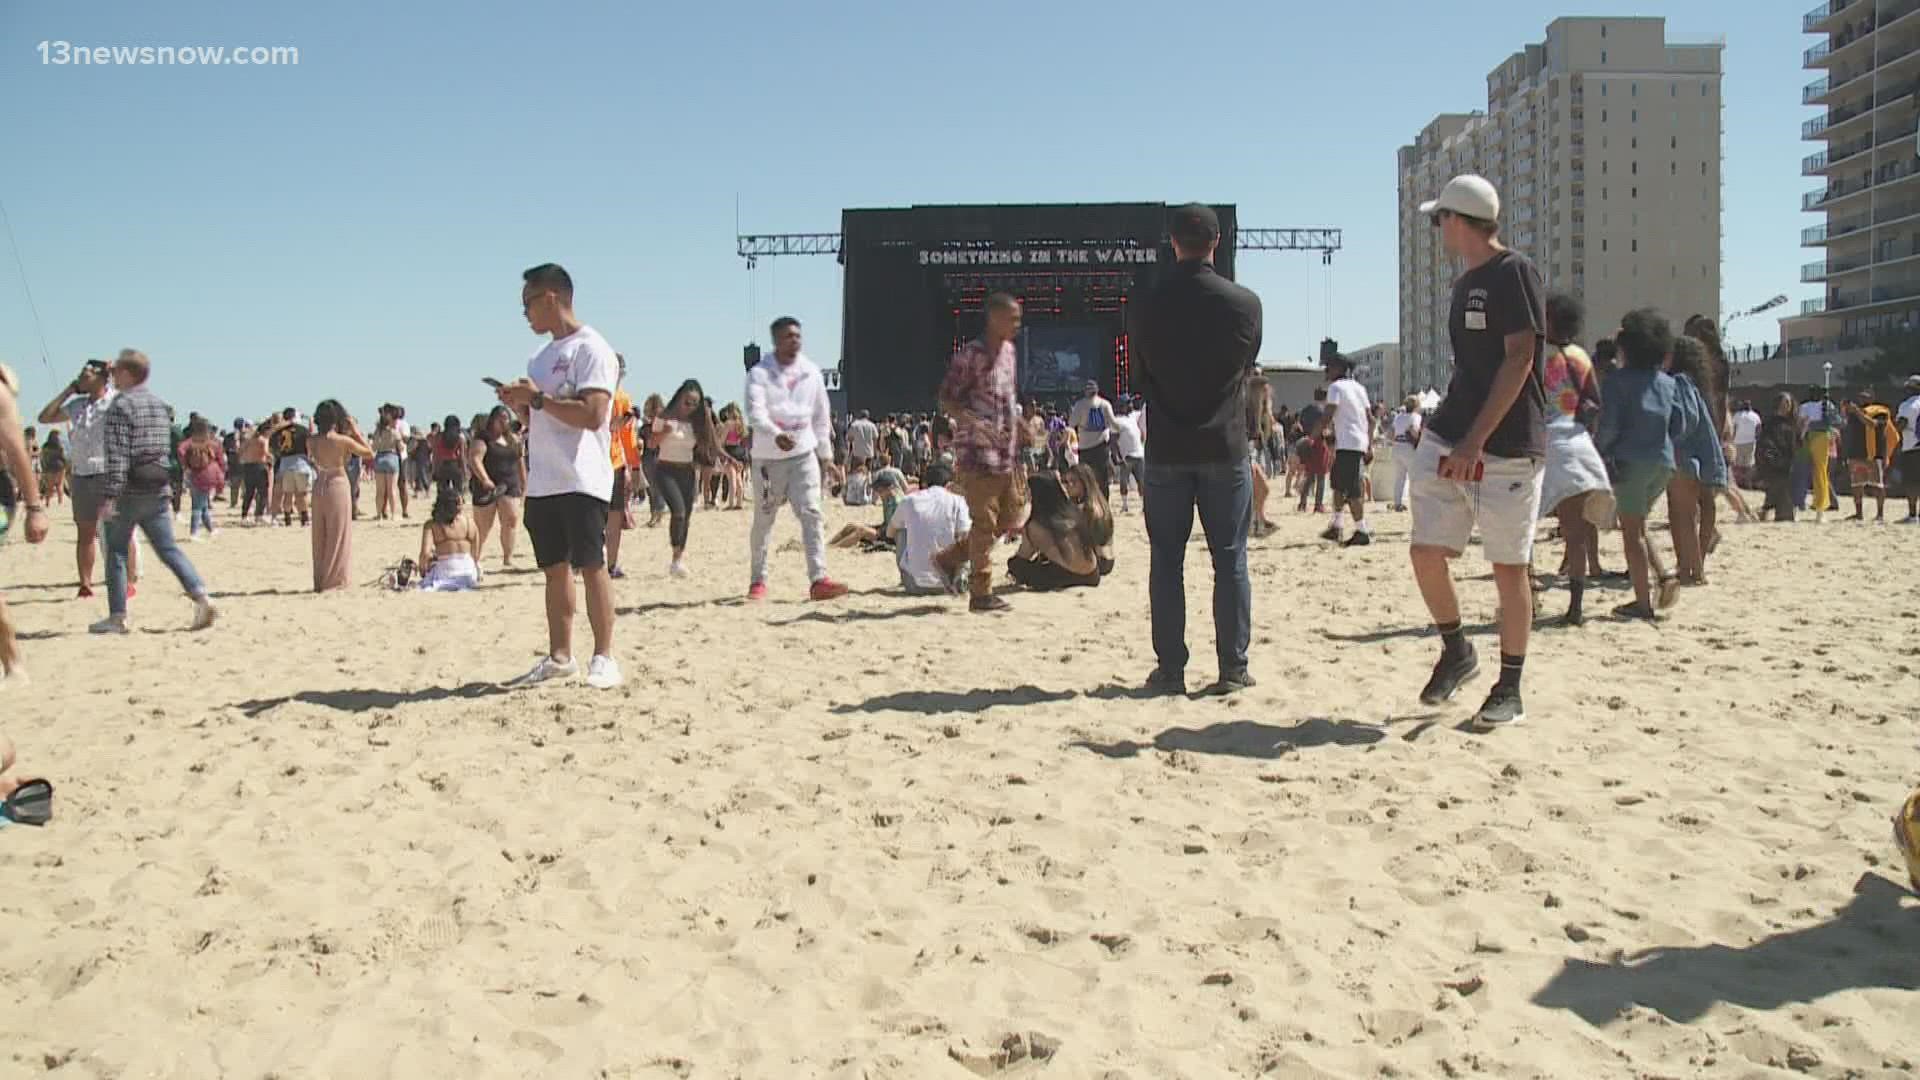 Virginia Beach's Something in the Water Festival may not return after Pharrell Williams sent a letter to city leaders saying the city has "toxic energy."